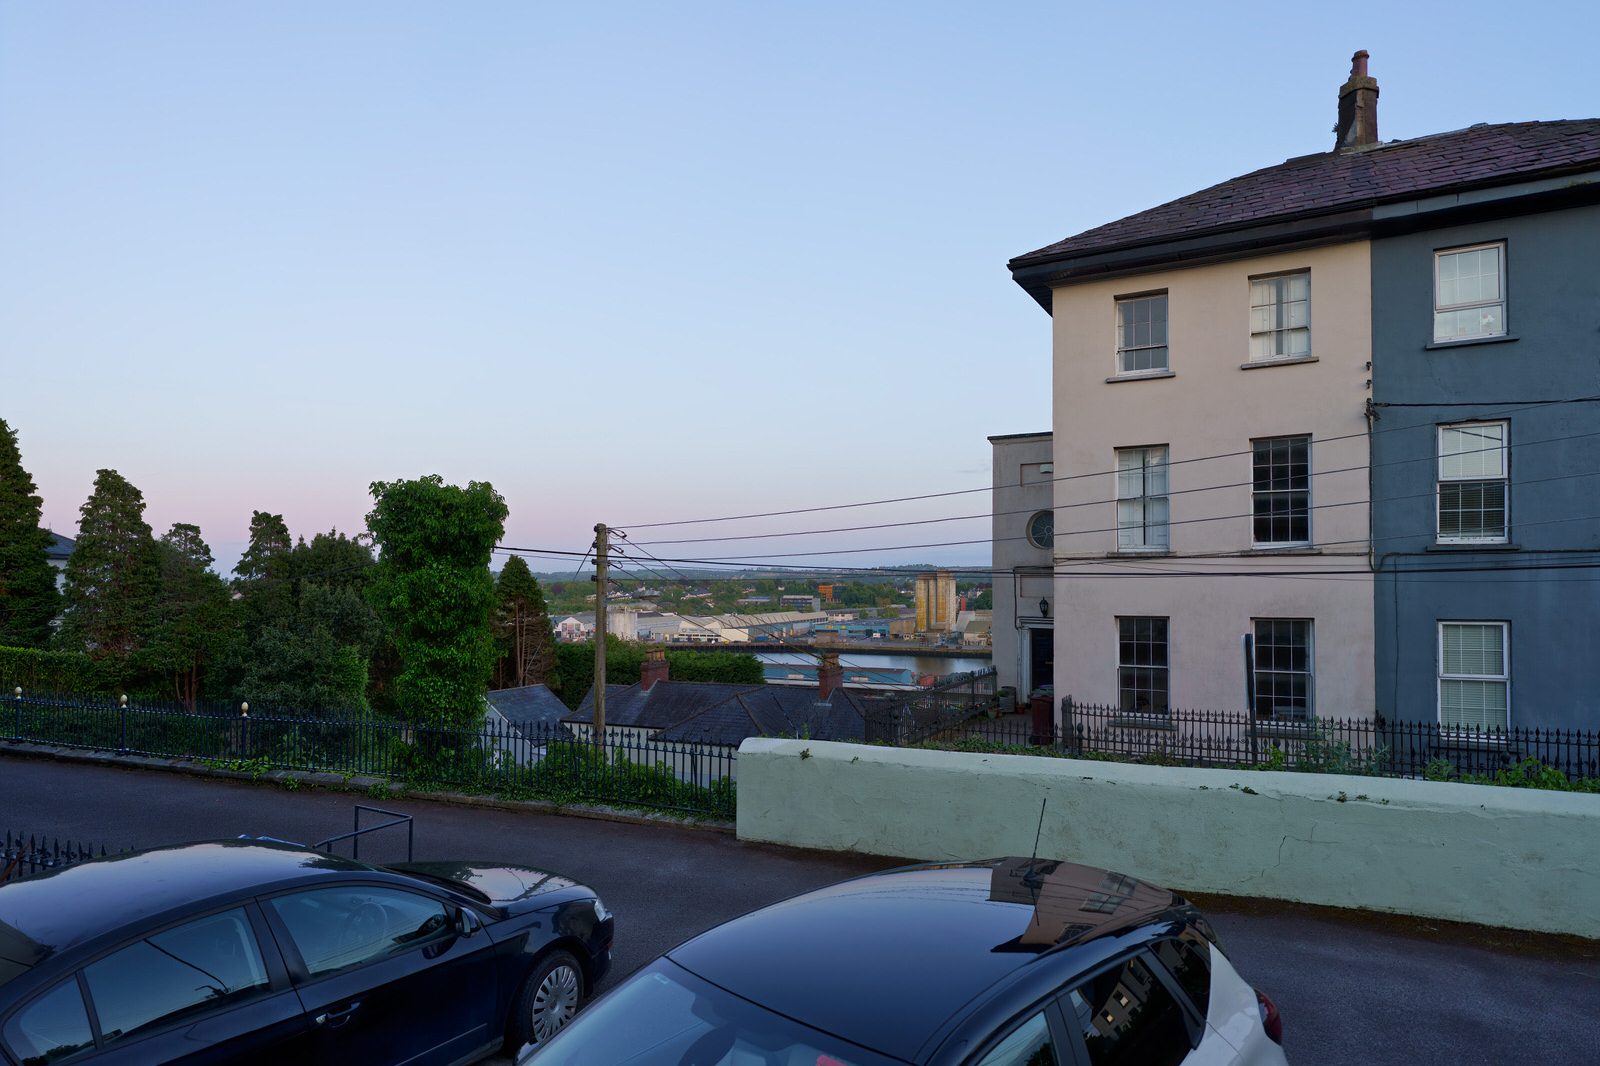 WHERE IS GABRIELLE HOUSE ON SUMMERHILL NORTH [IN CORK EVERYWHERE IS UPHILL]-225774-1